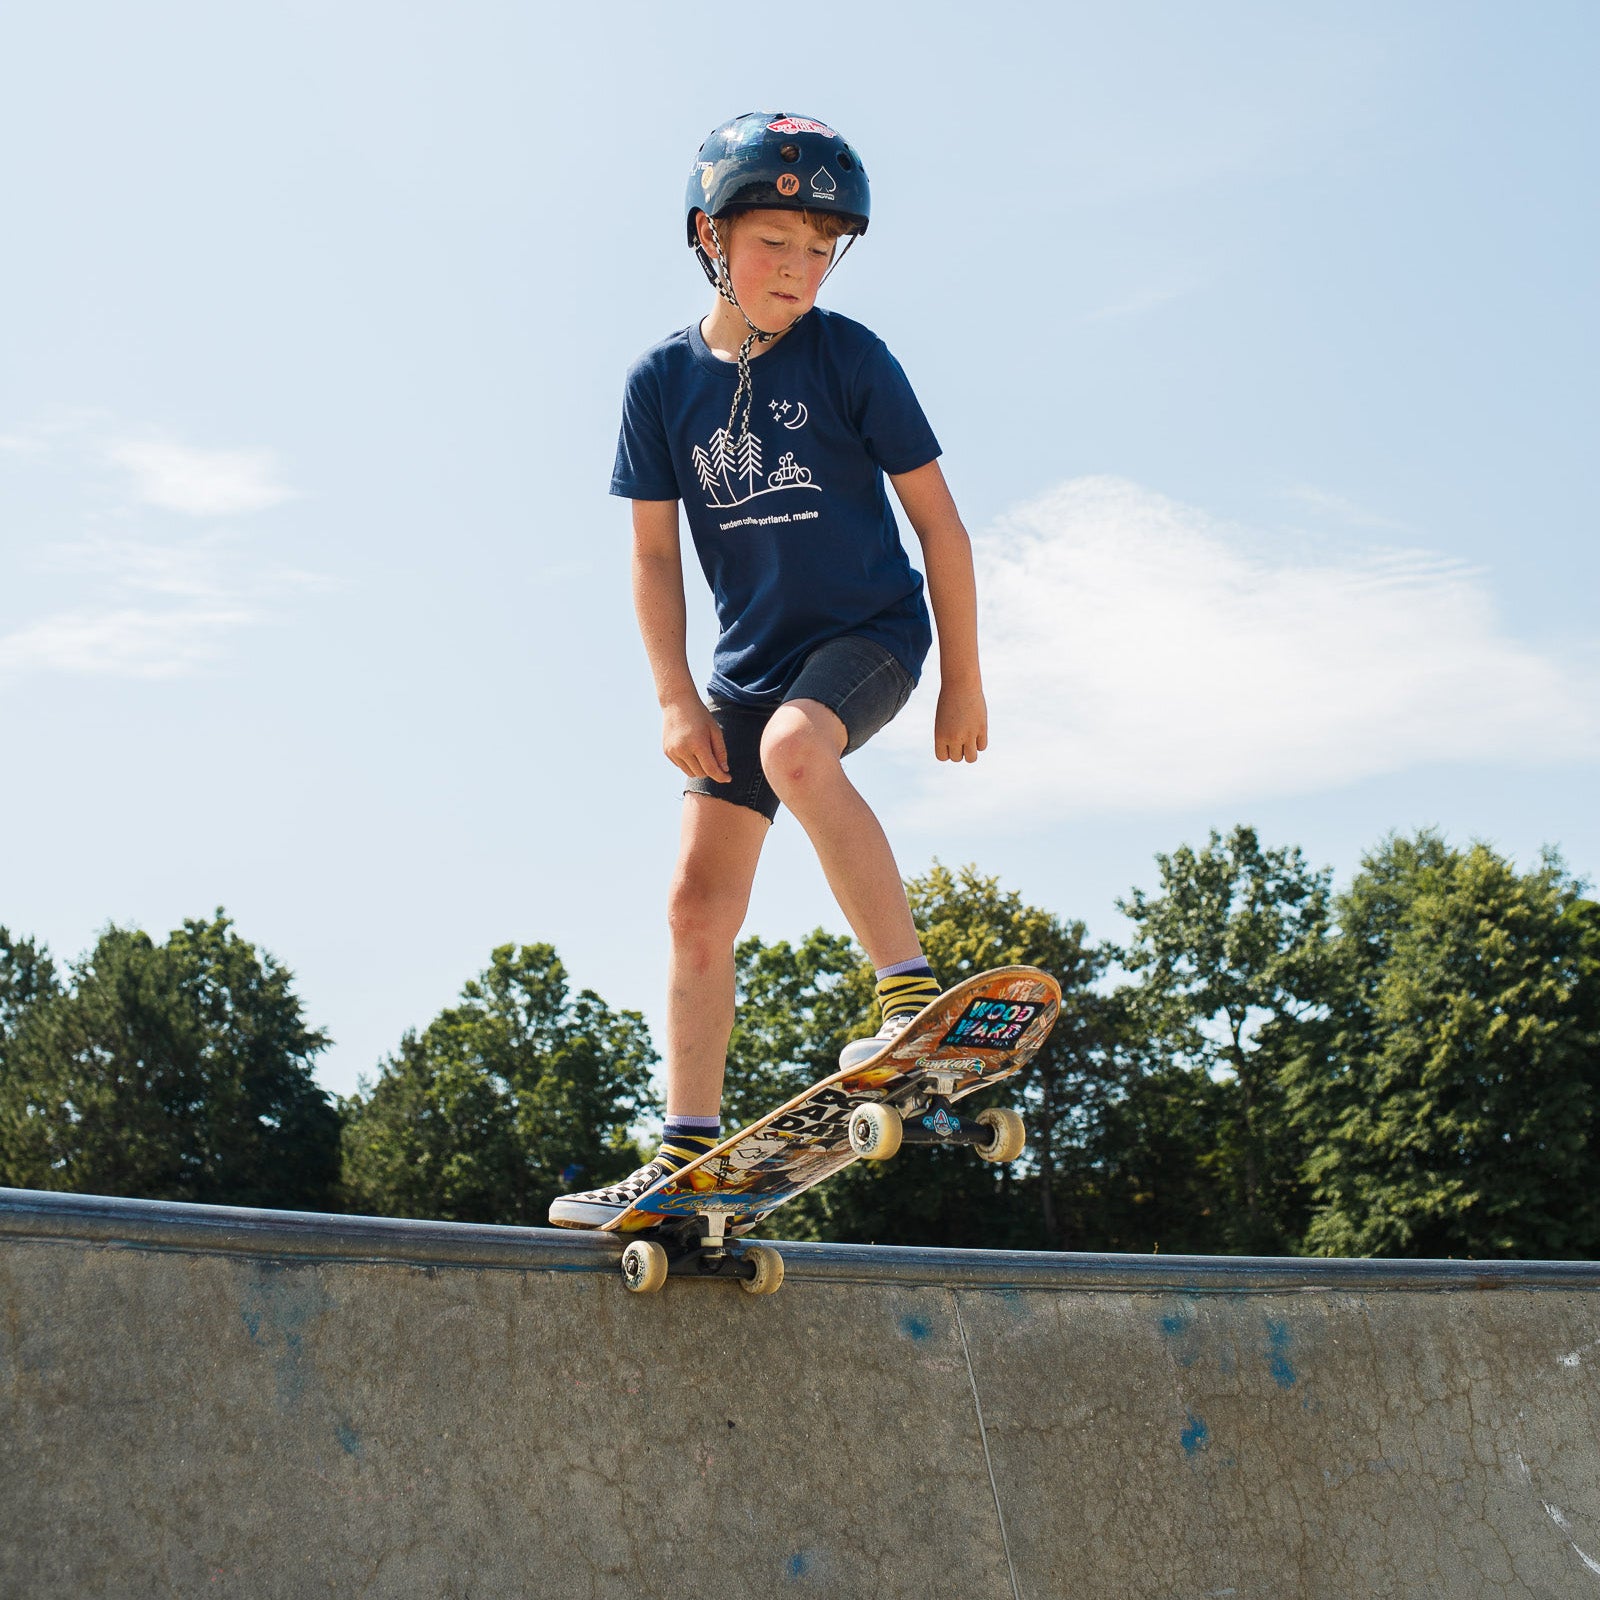 A young skateboarder in a helmet and 100% cotton Tandem Kids Tee stands confidently with a skateboard, looking off into the distance, with another person in the background at a skate park.